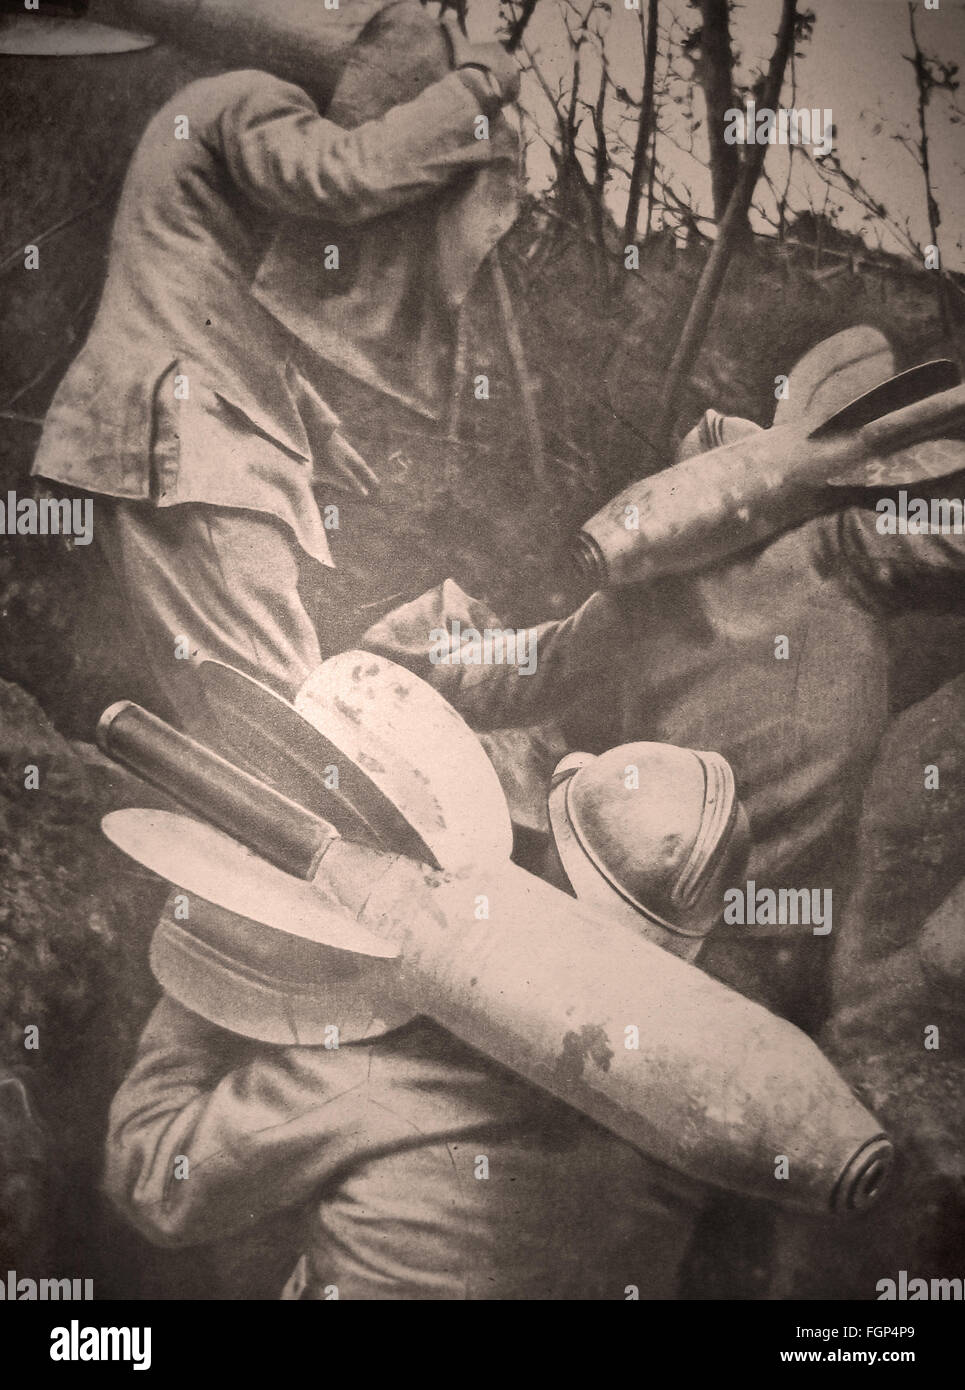 Battle of Verdun 1916 - Soldiers carrying bombs Stock Photo